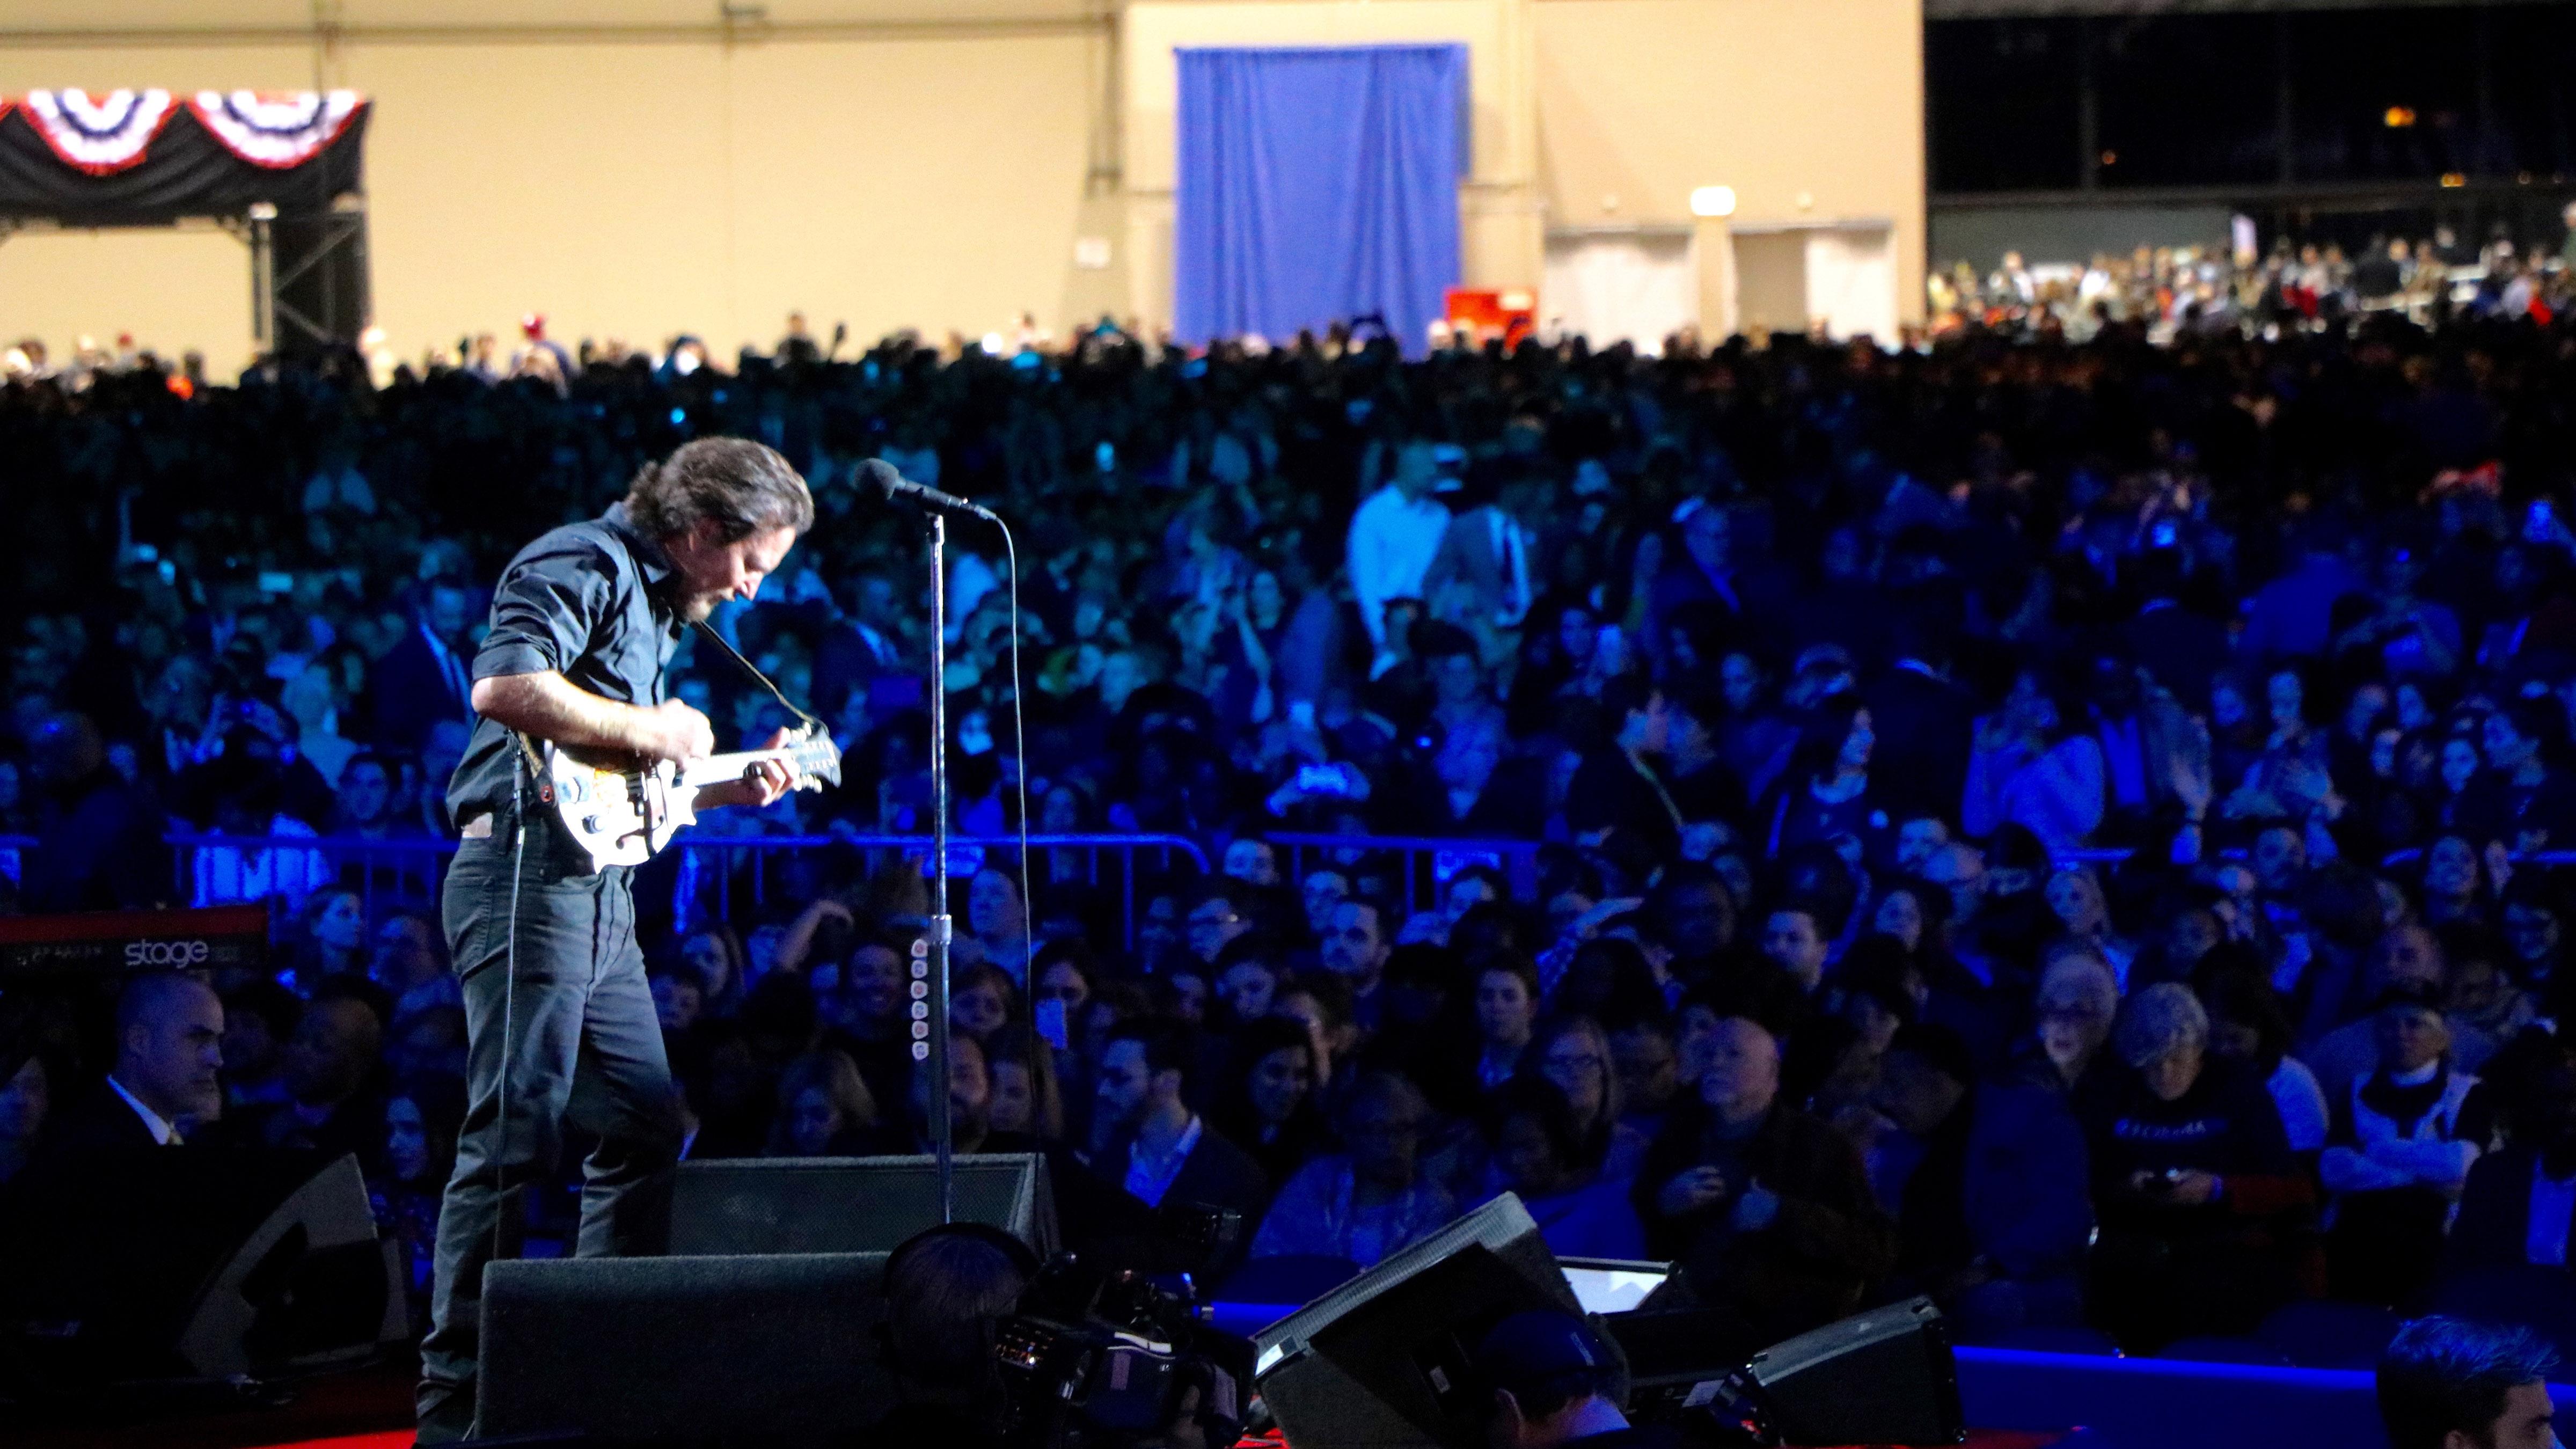 Musician Eddie Vedder opens the event. He was later joined by the Chicago Children's Choir. (Evan Garcia / Chicago Tonight)